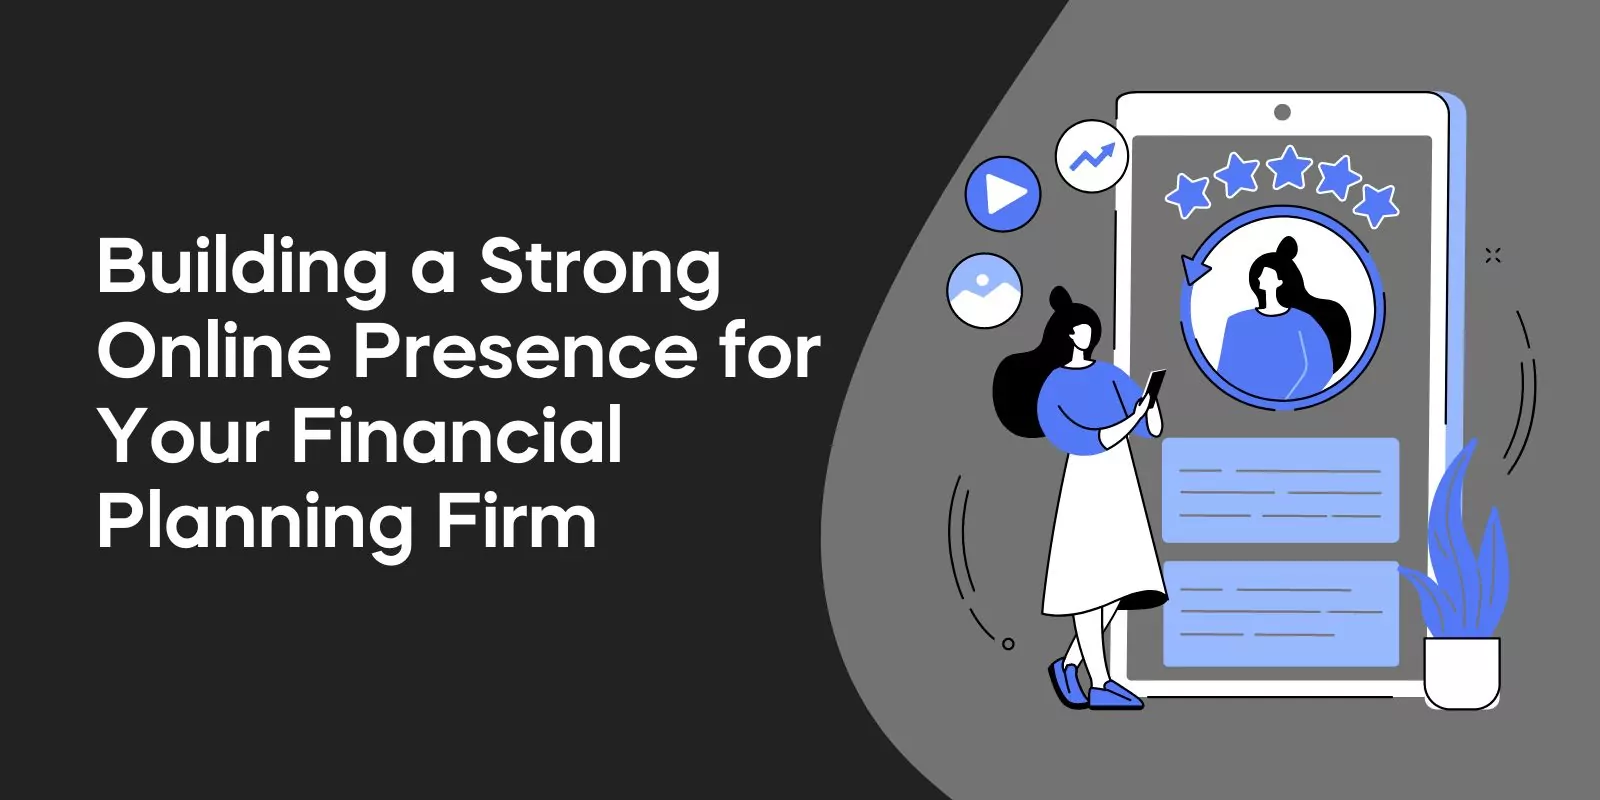 Building a Strong Online Presence for Your Financial Planning Firm